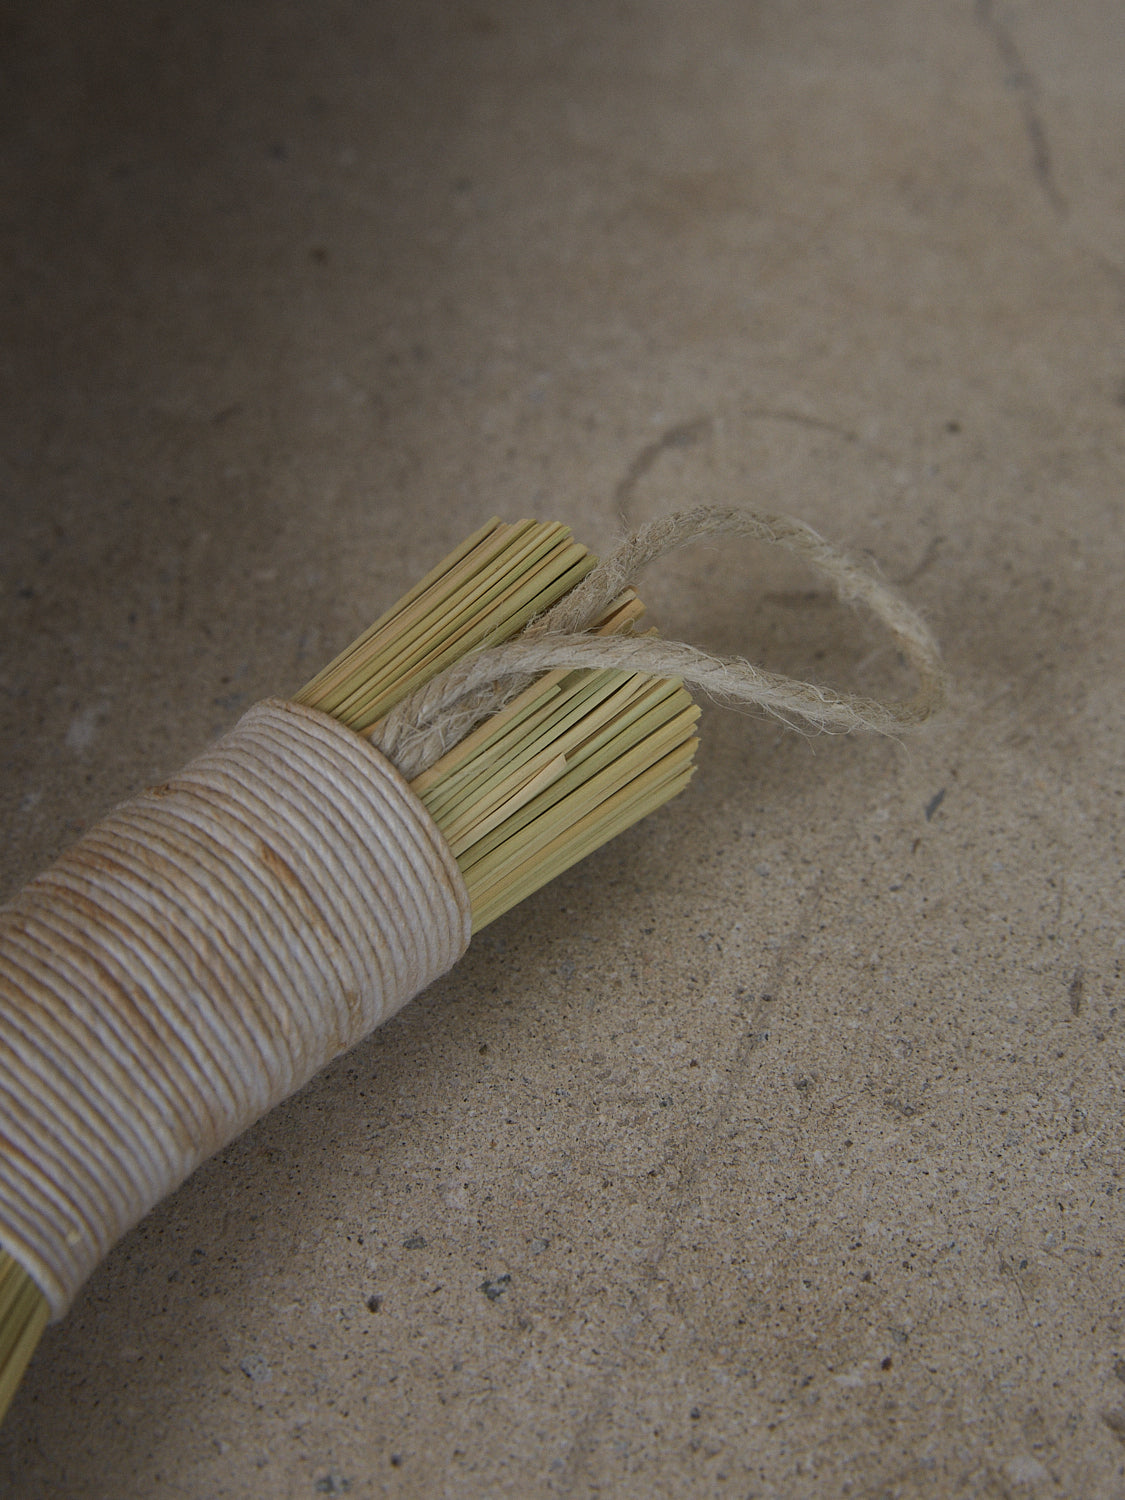 Neutral, rustic handwoven broom made from Sorghum and hemp cording in a classic Appalachian style.